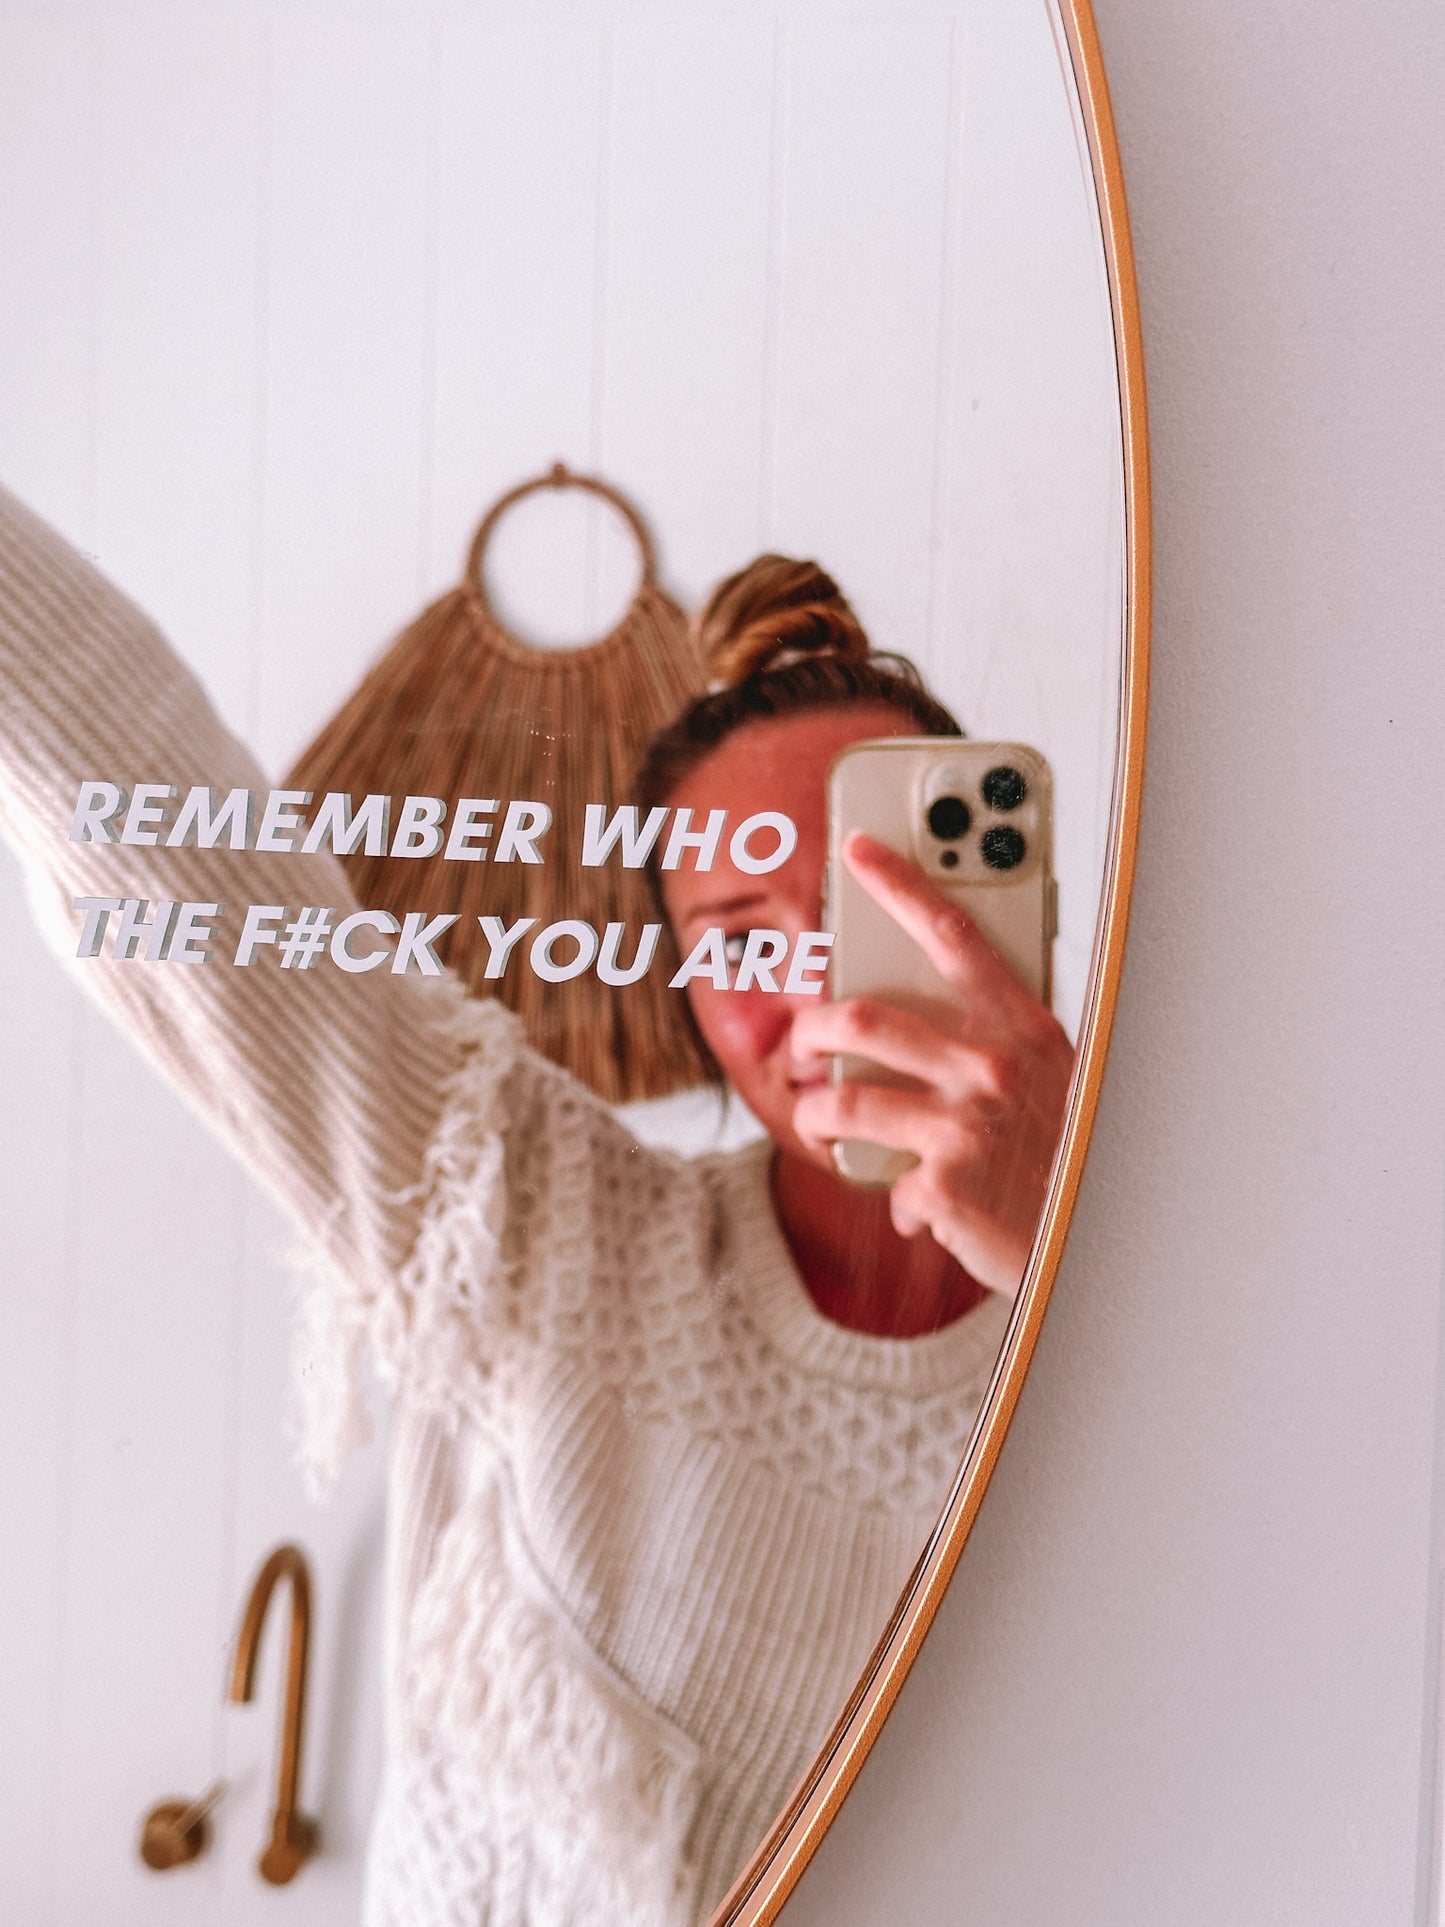 Remember who the f#ck you are  - Decal